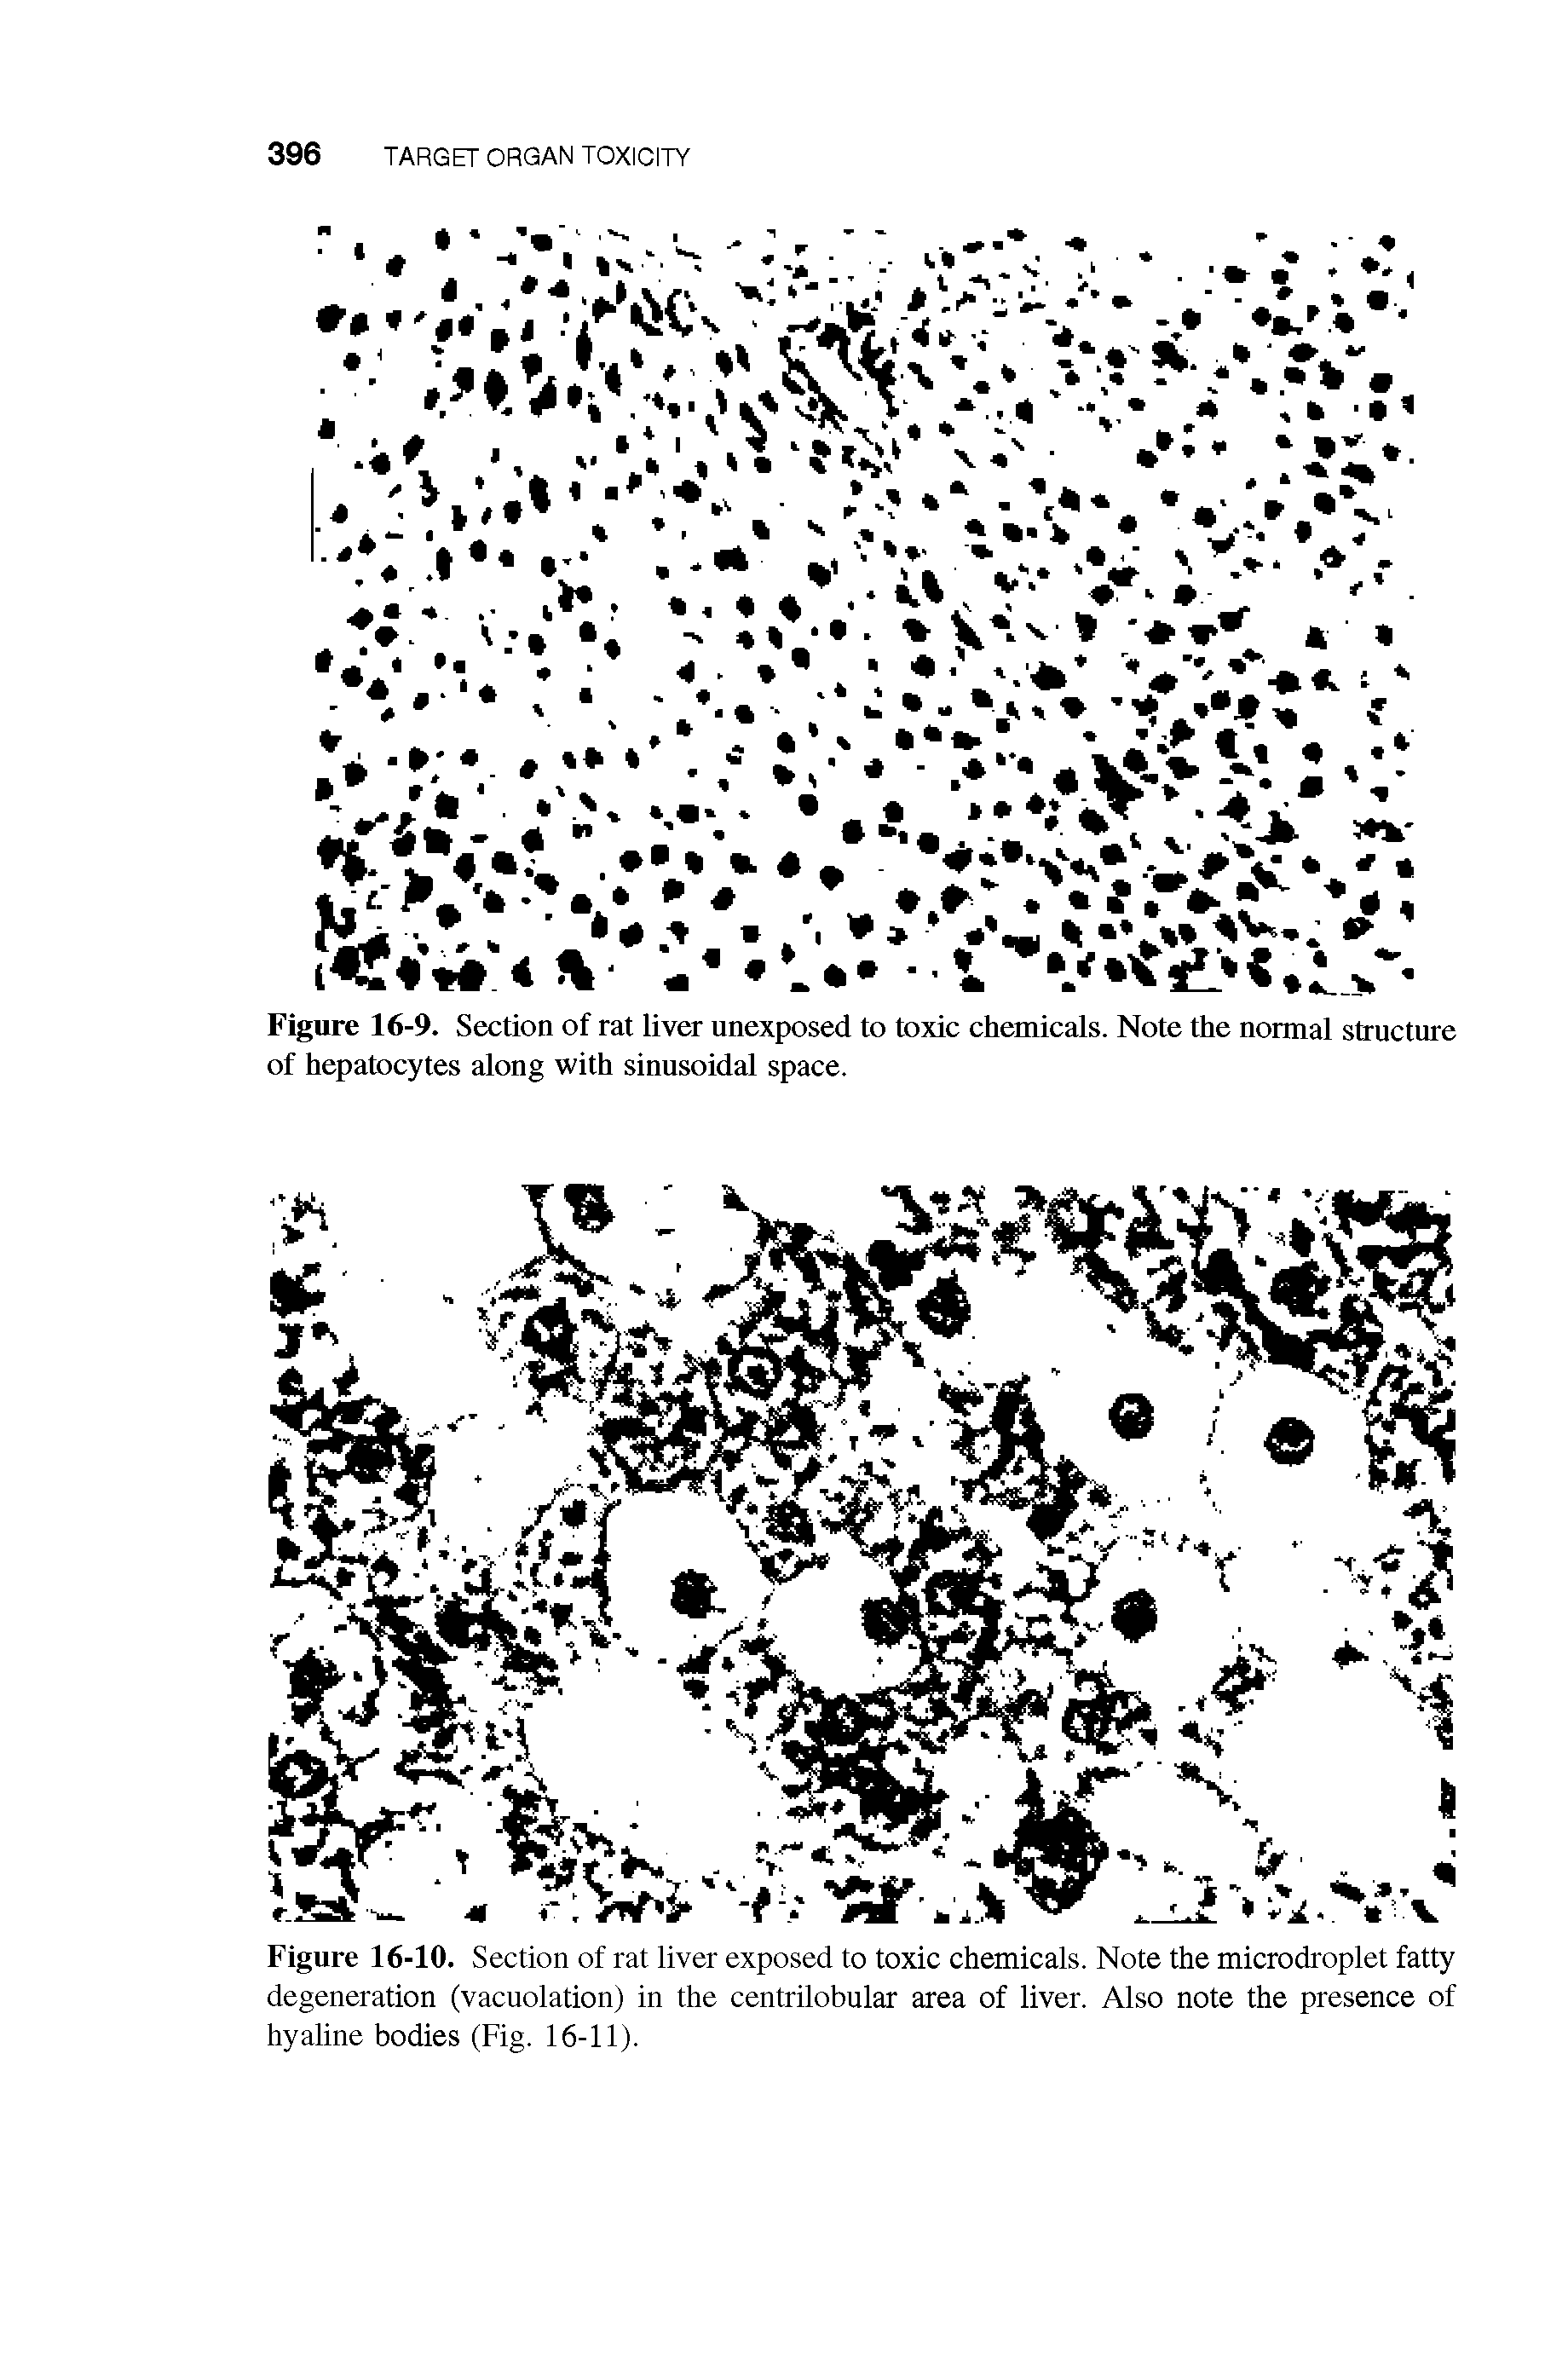 Figure 16-10. Section of rat liver exposed to toxic chemicals. Note the microdroplet fatty degeneration (vacuolation) in the centrilobular area of liver. Also note the presence of hyaline bodies (Fig. 16-11).